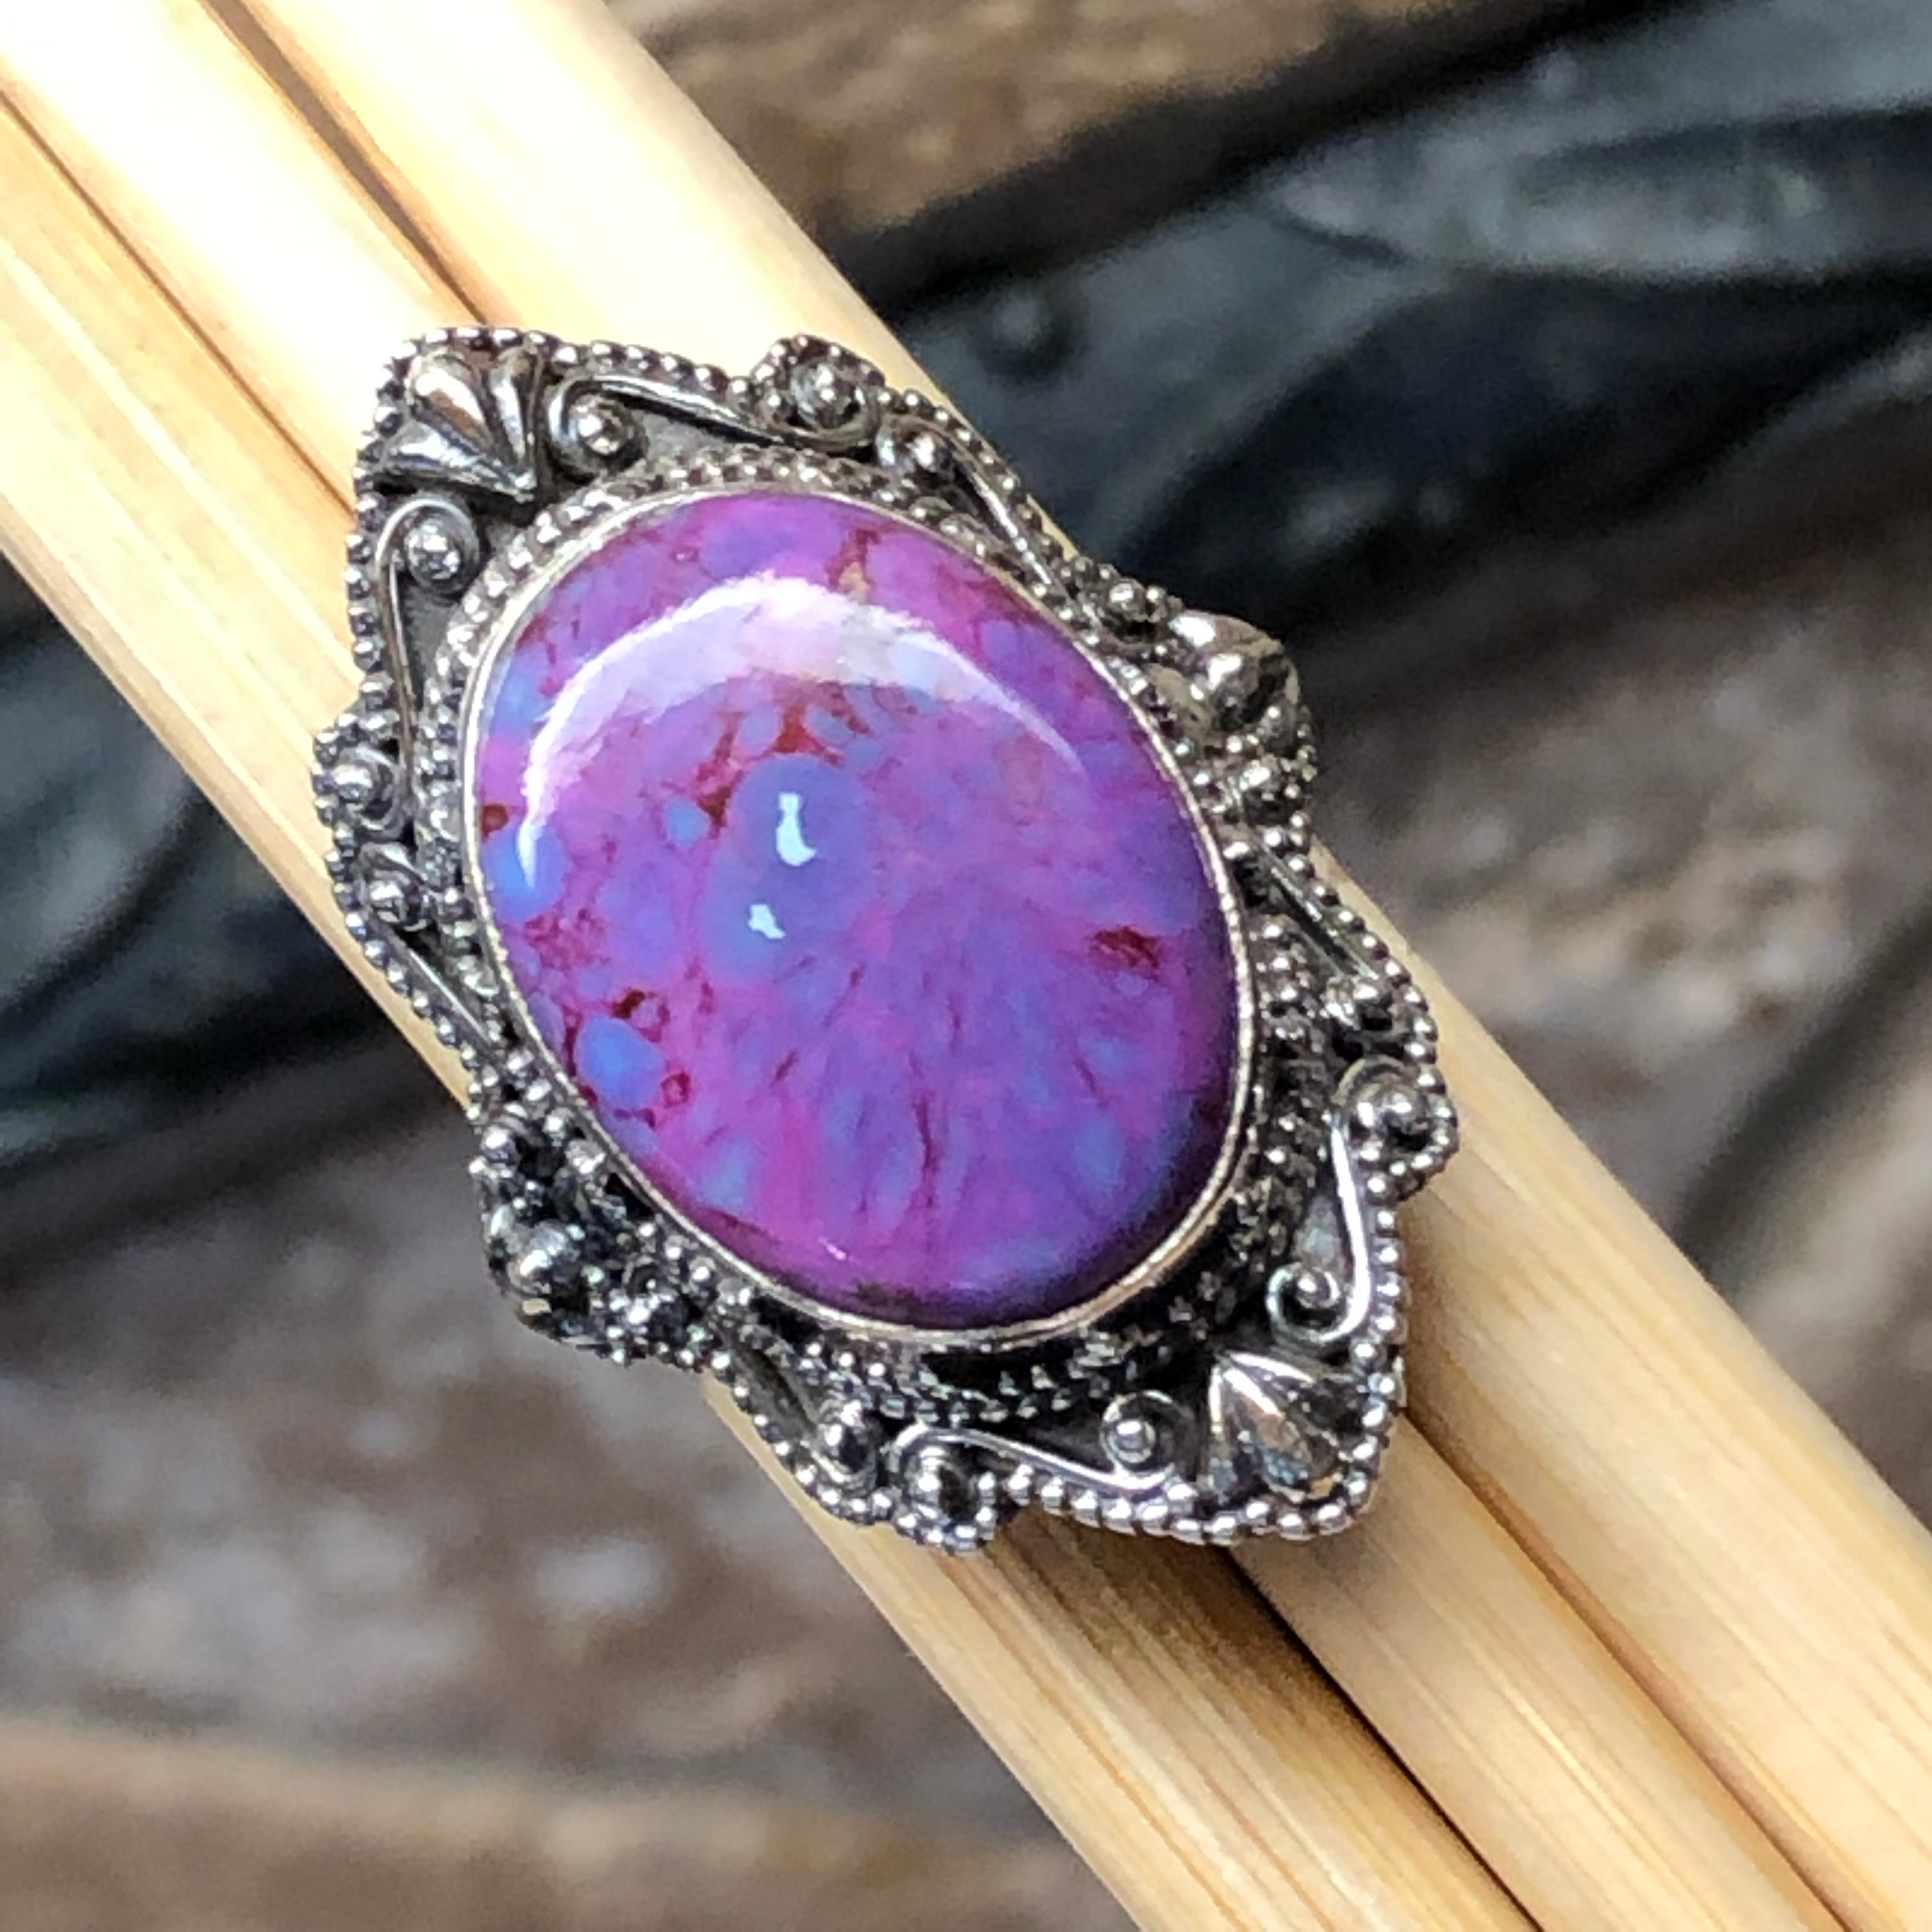 Purple Copper Mohave Turquoise 925 Solid Sterling Silver Ring Size 8 - Natural Rocks by Kala